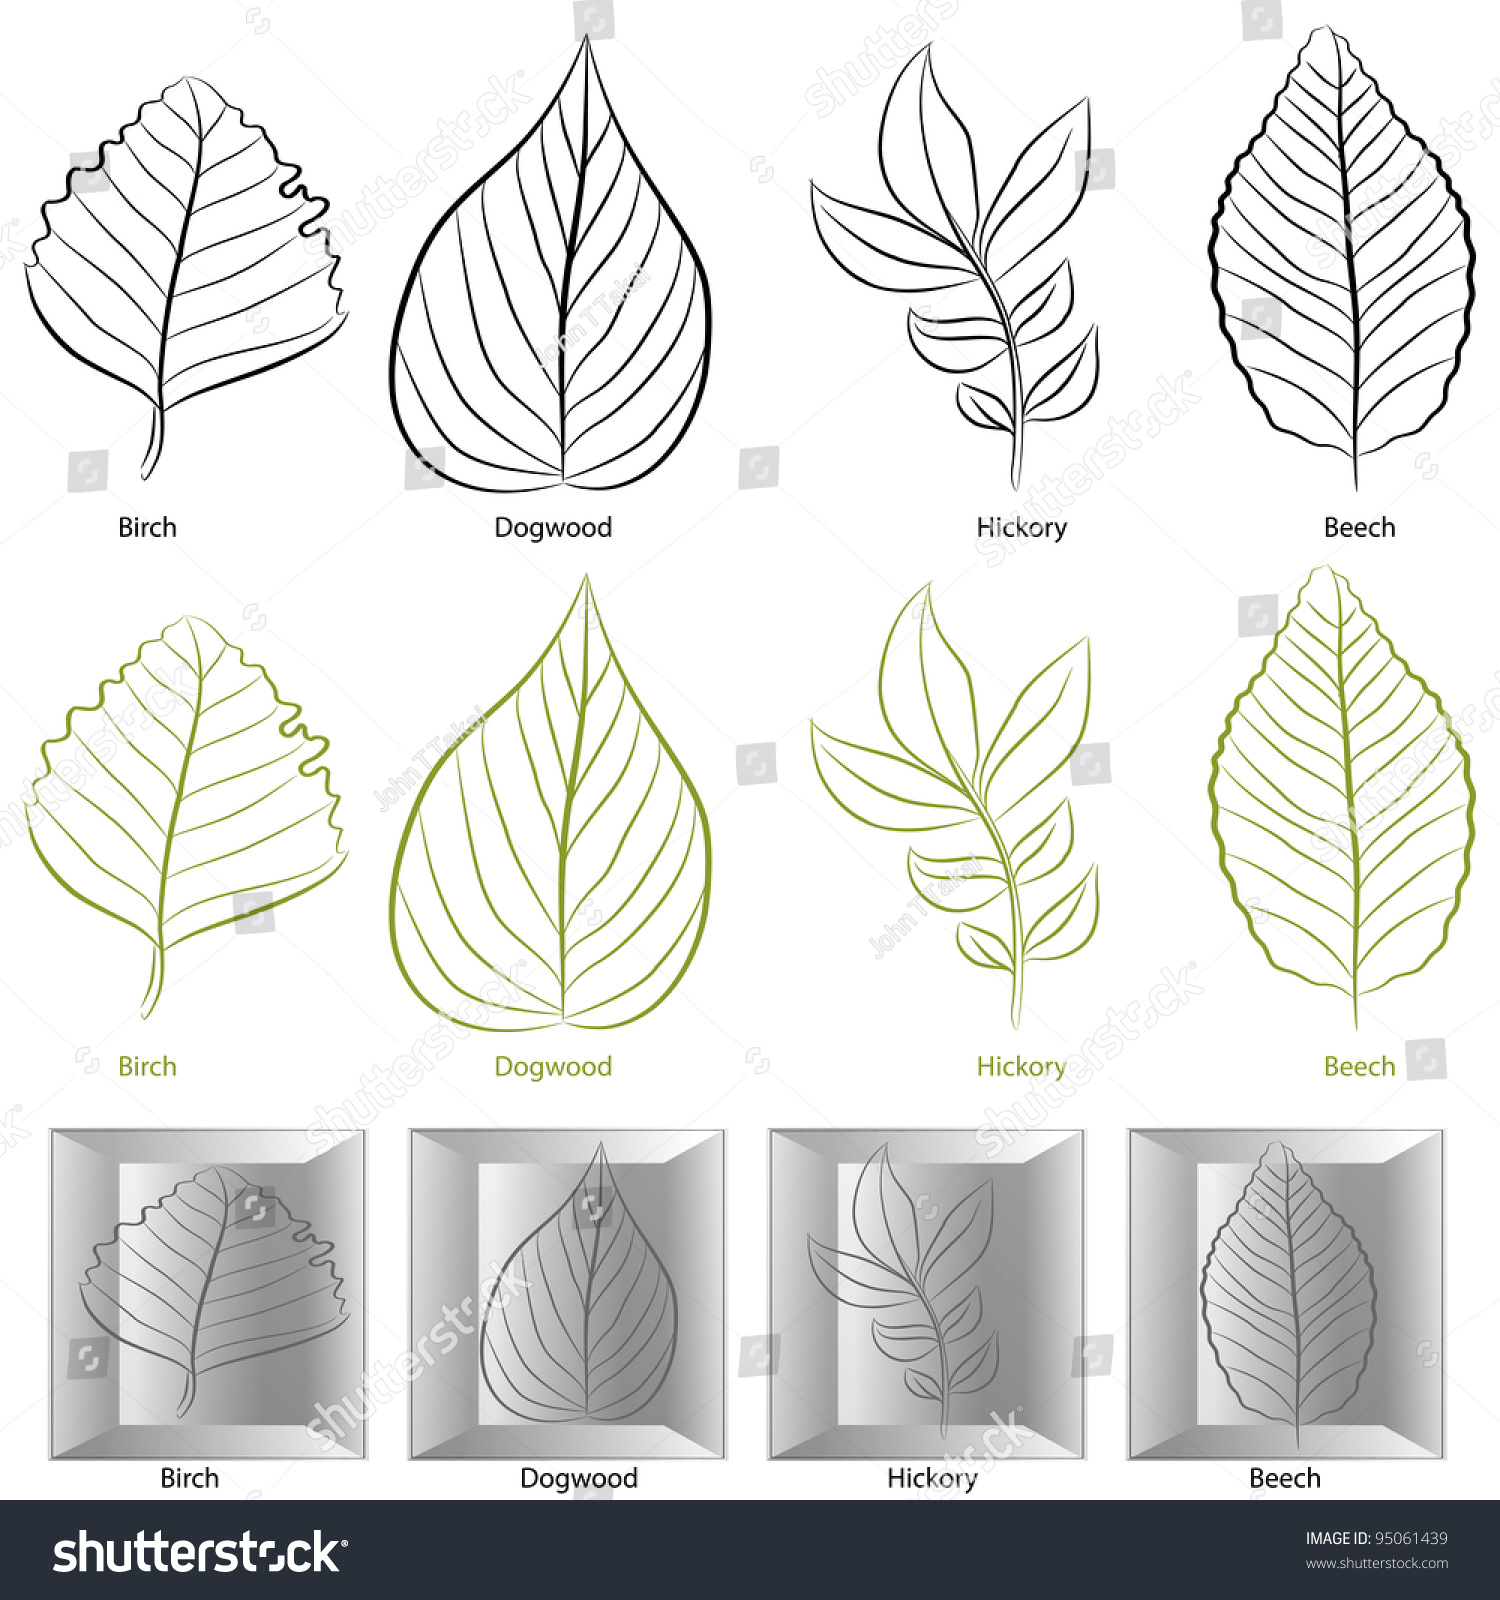 SVG of An image of a set of birch, dogwood, hickory and birch tree leaf types. svg